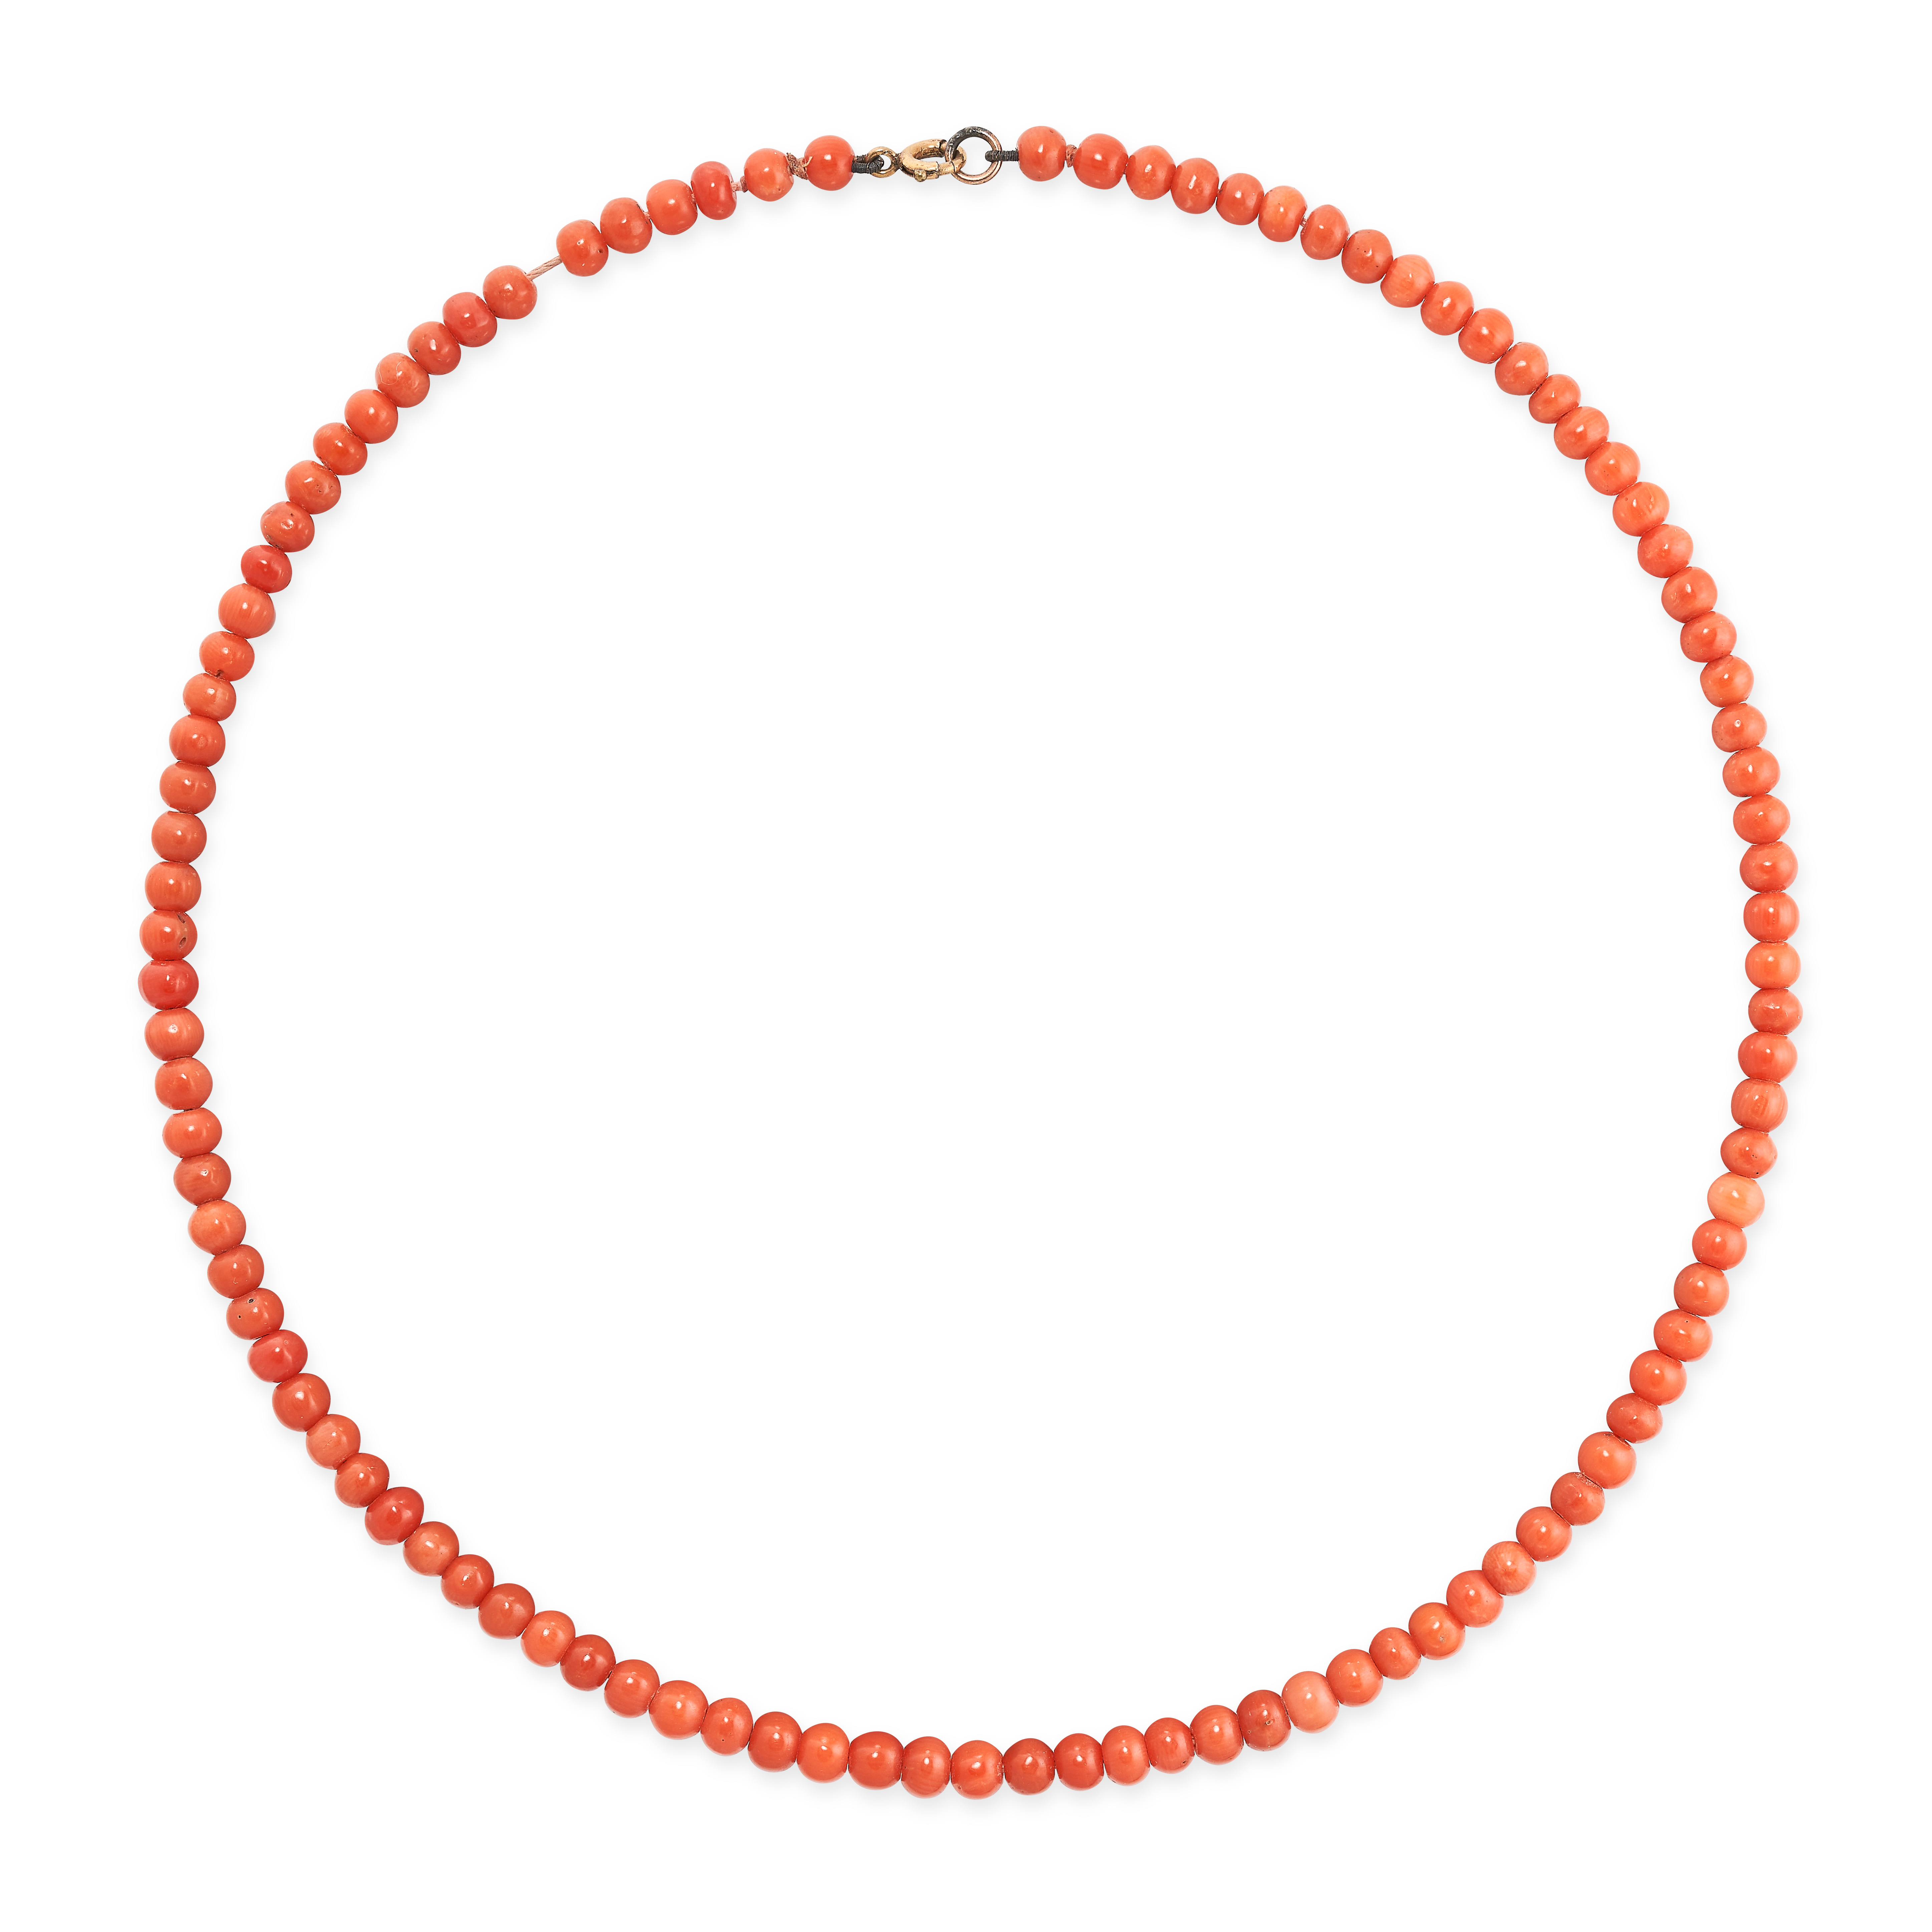 NO RESERVE - A CORAL BEAD NECKLACE comprising a single row of polished coral beads, no assay